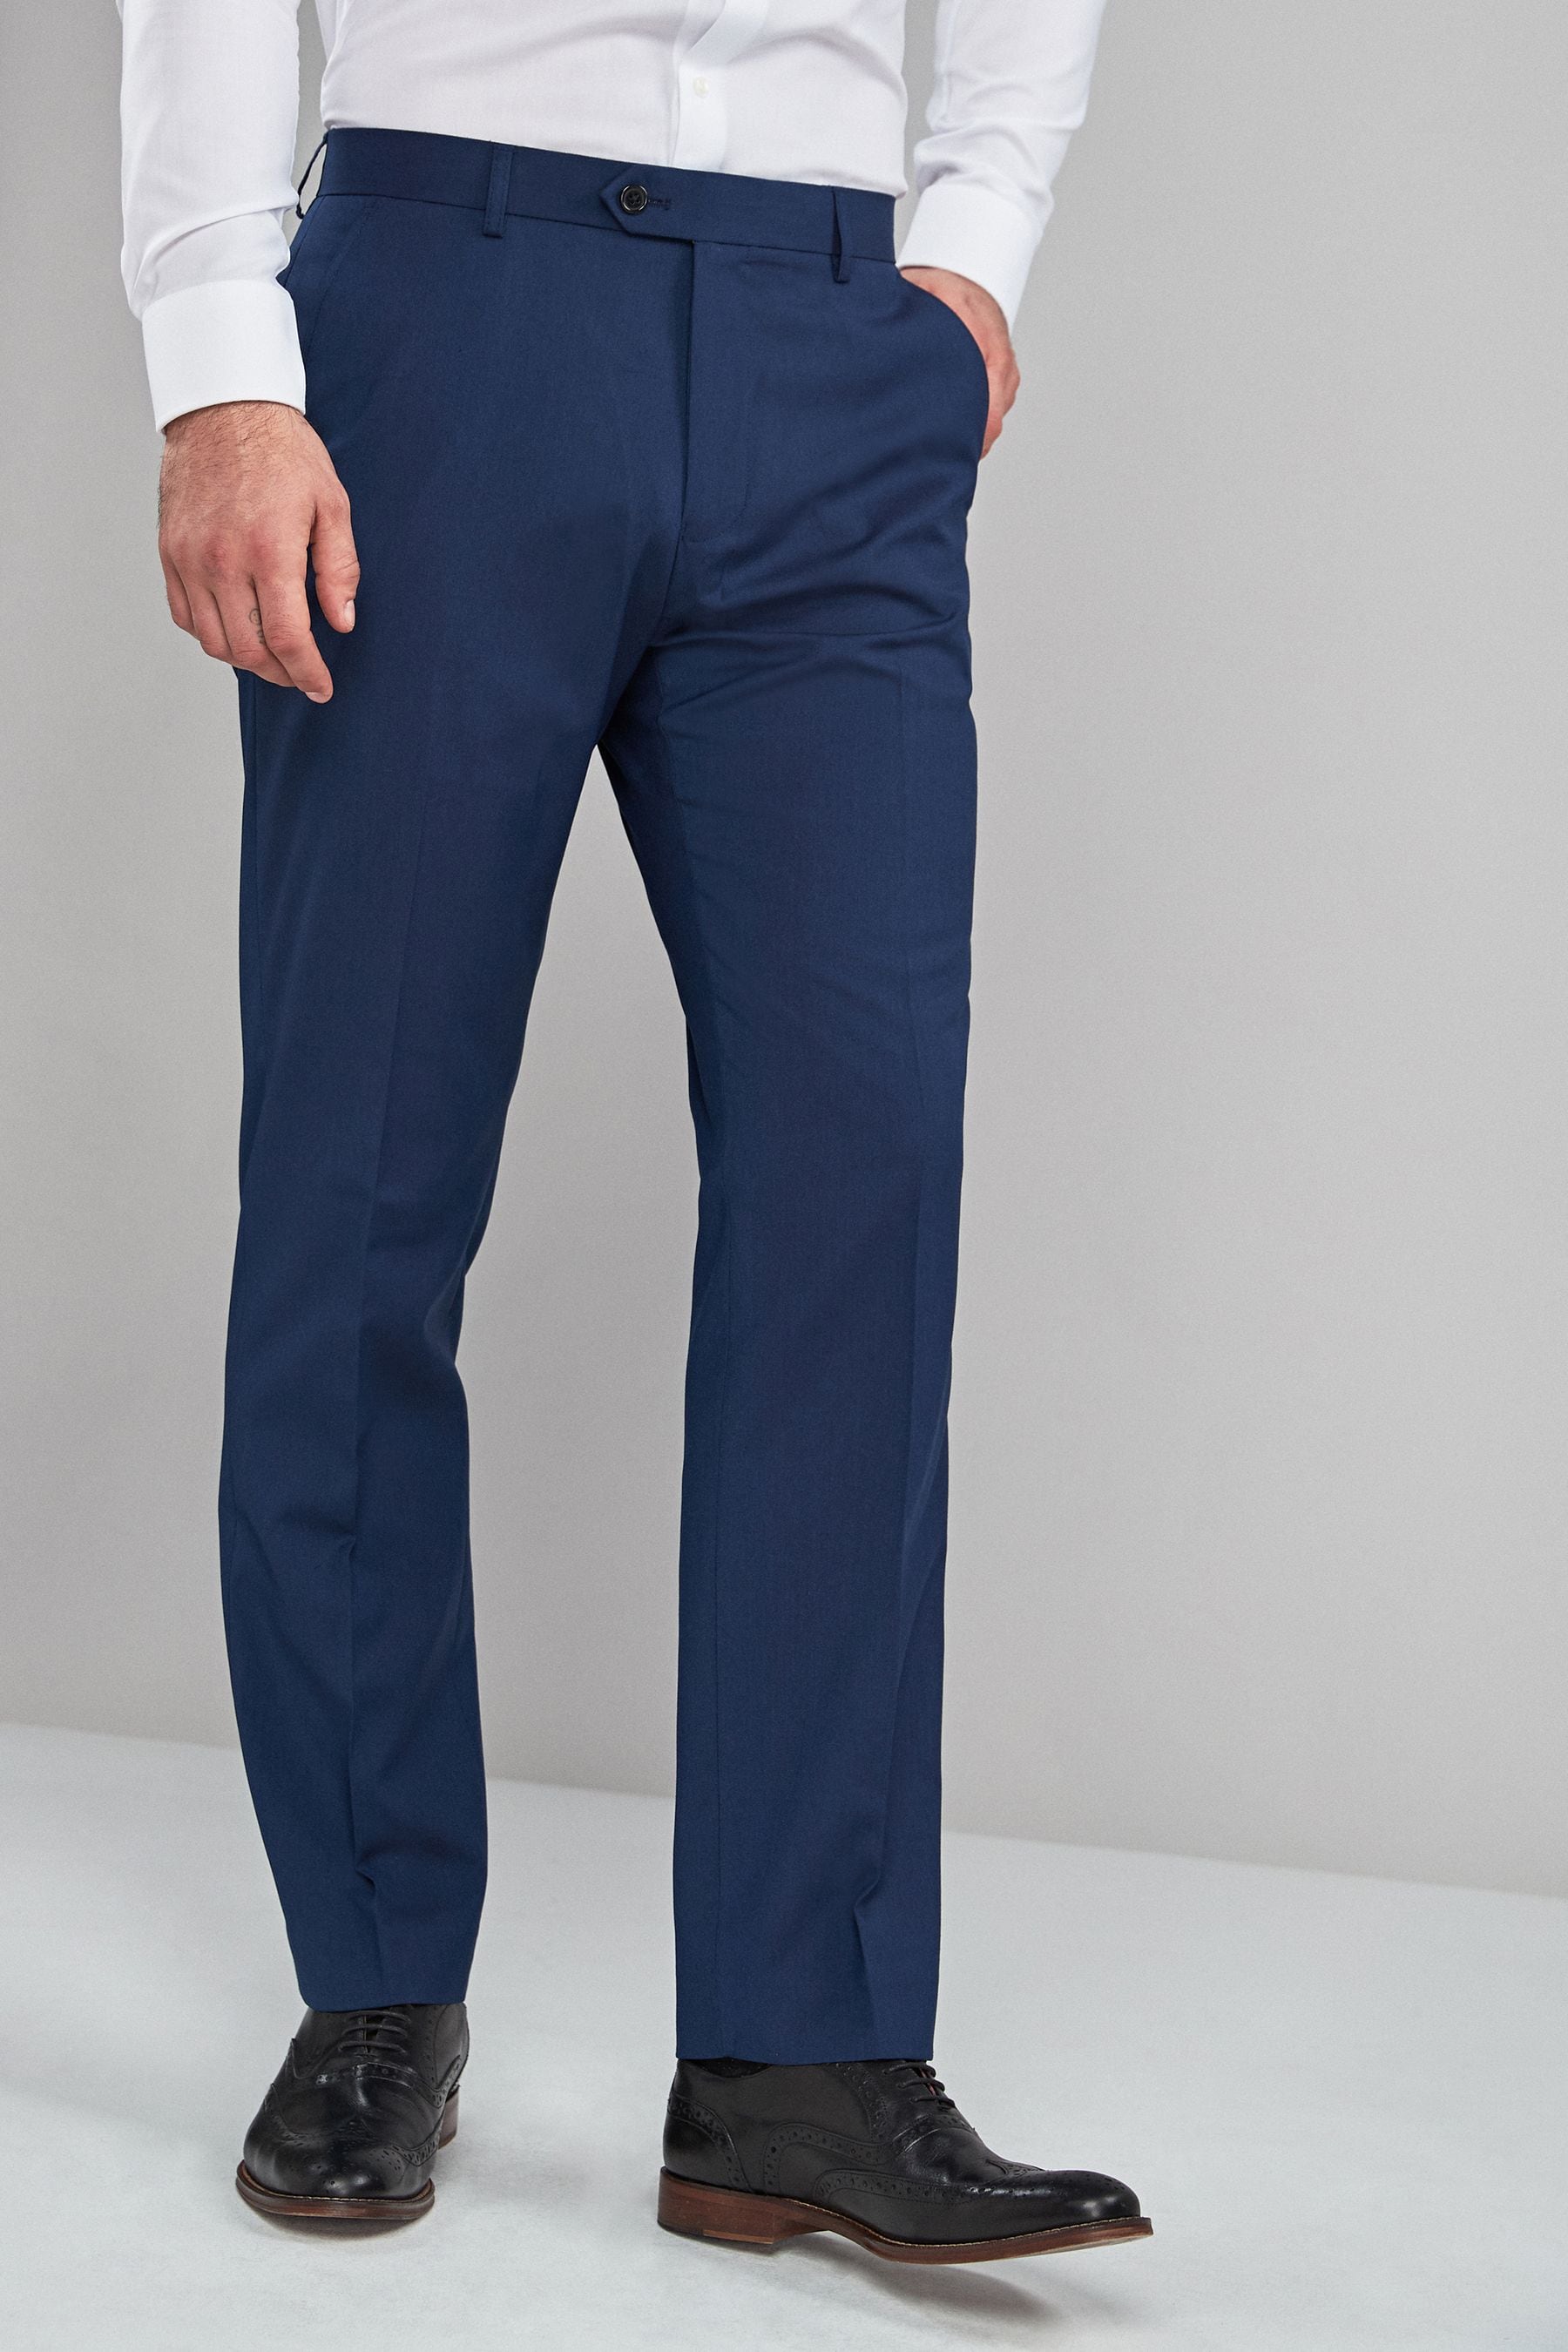 Buy Stretch Formal Trousers from the Next UK online shop